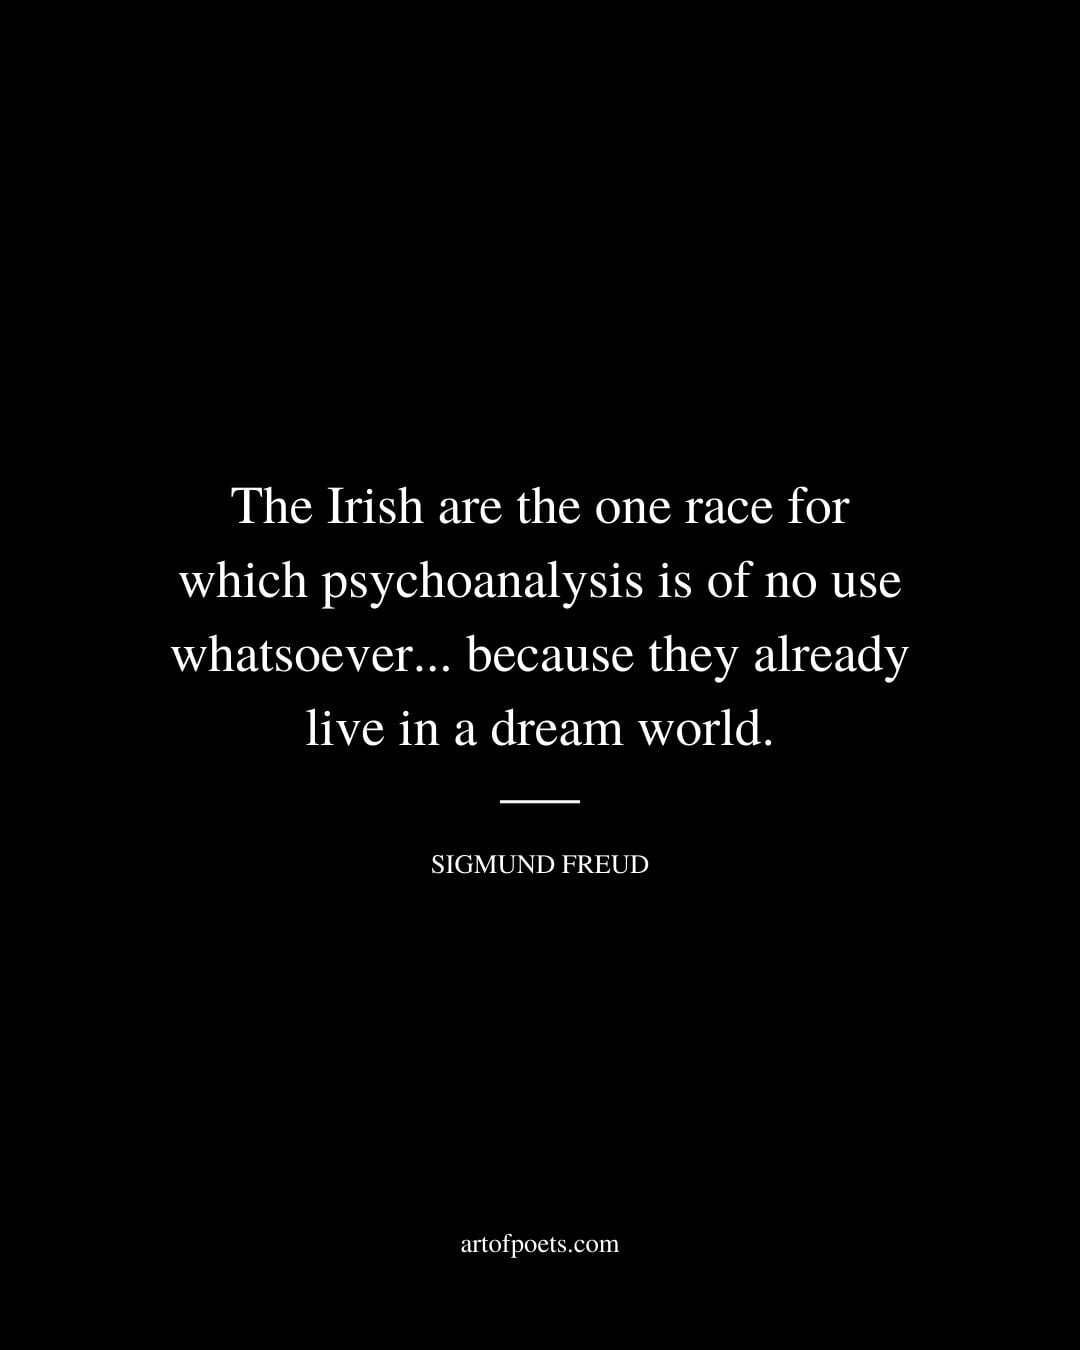 The Irish are the one race for which psychoanalysis is of no use whatsoever. because they already live in a dream world